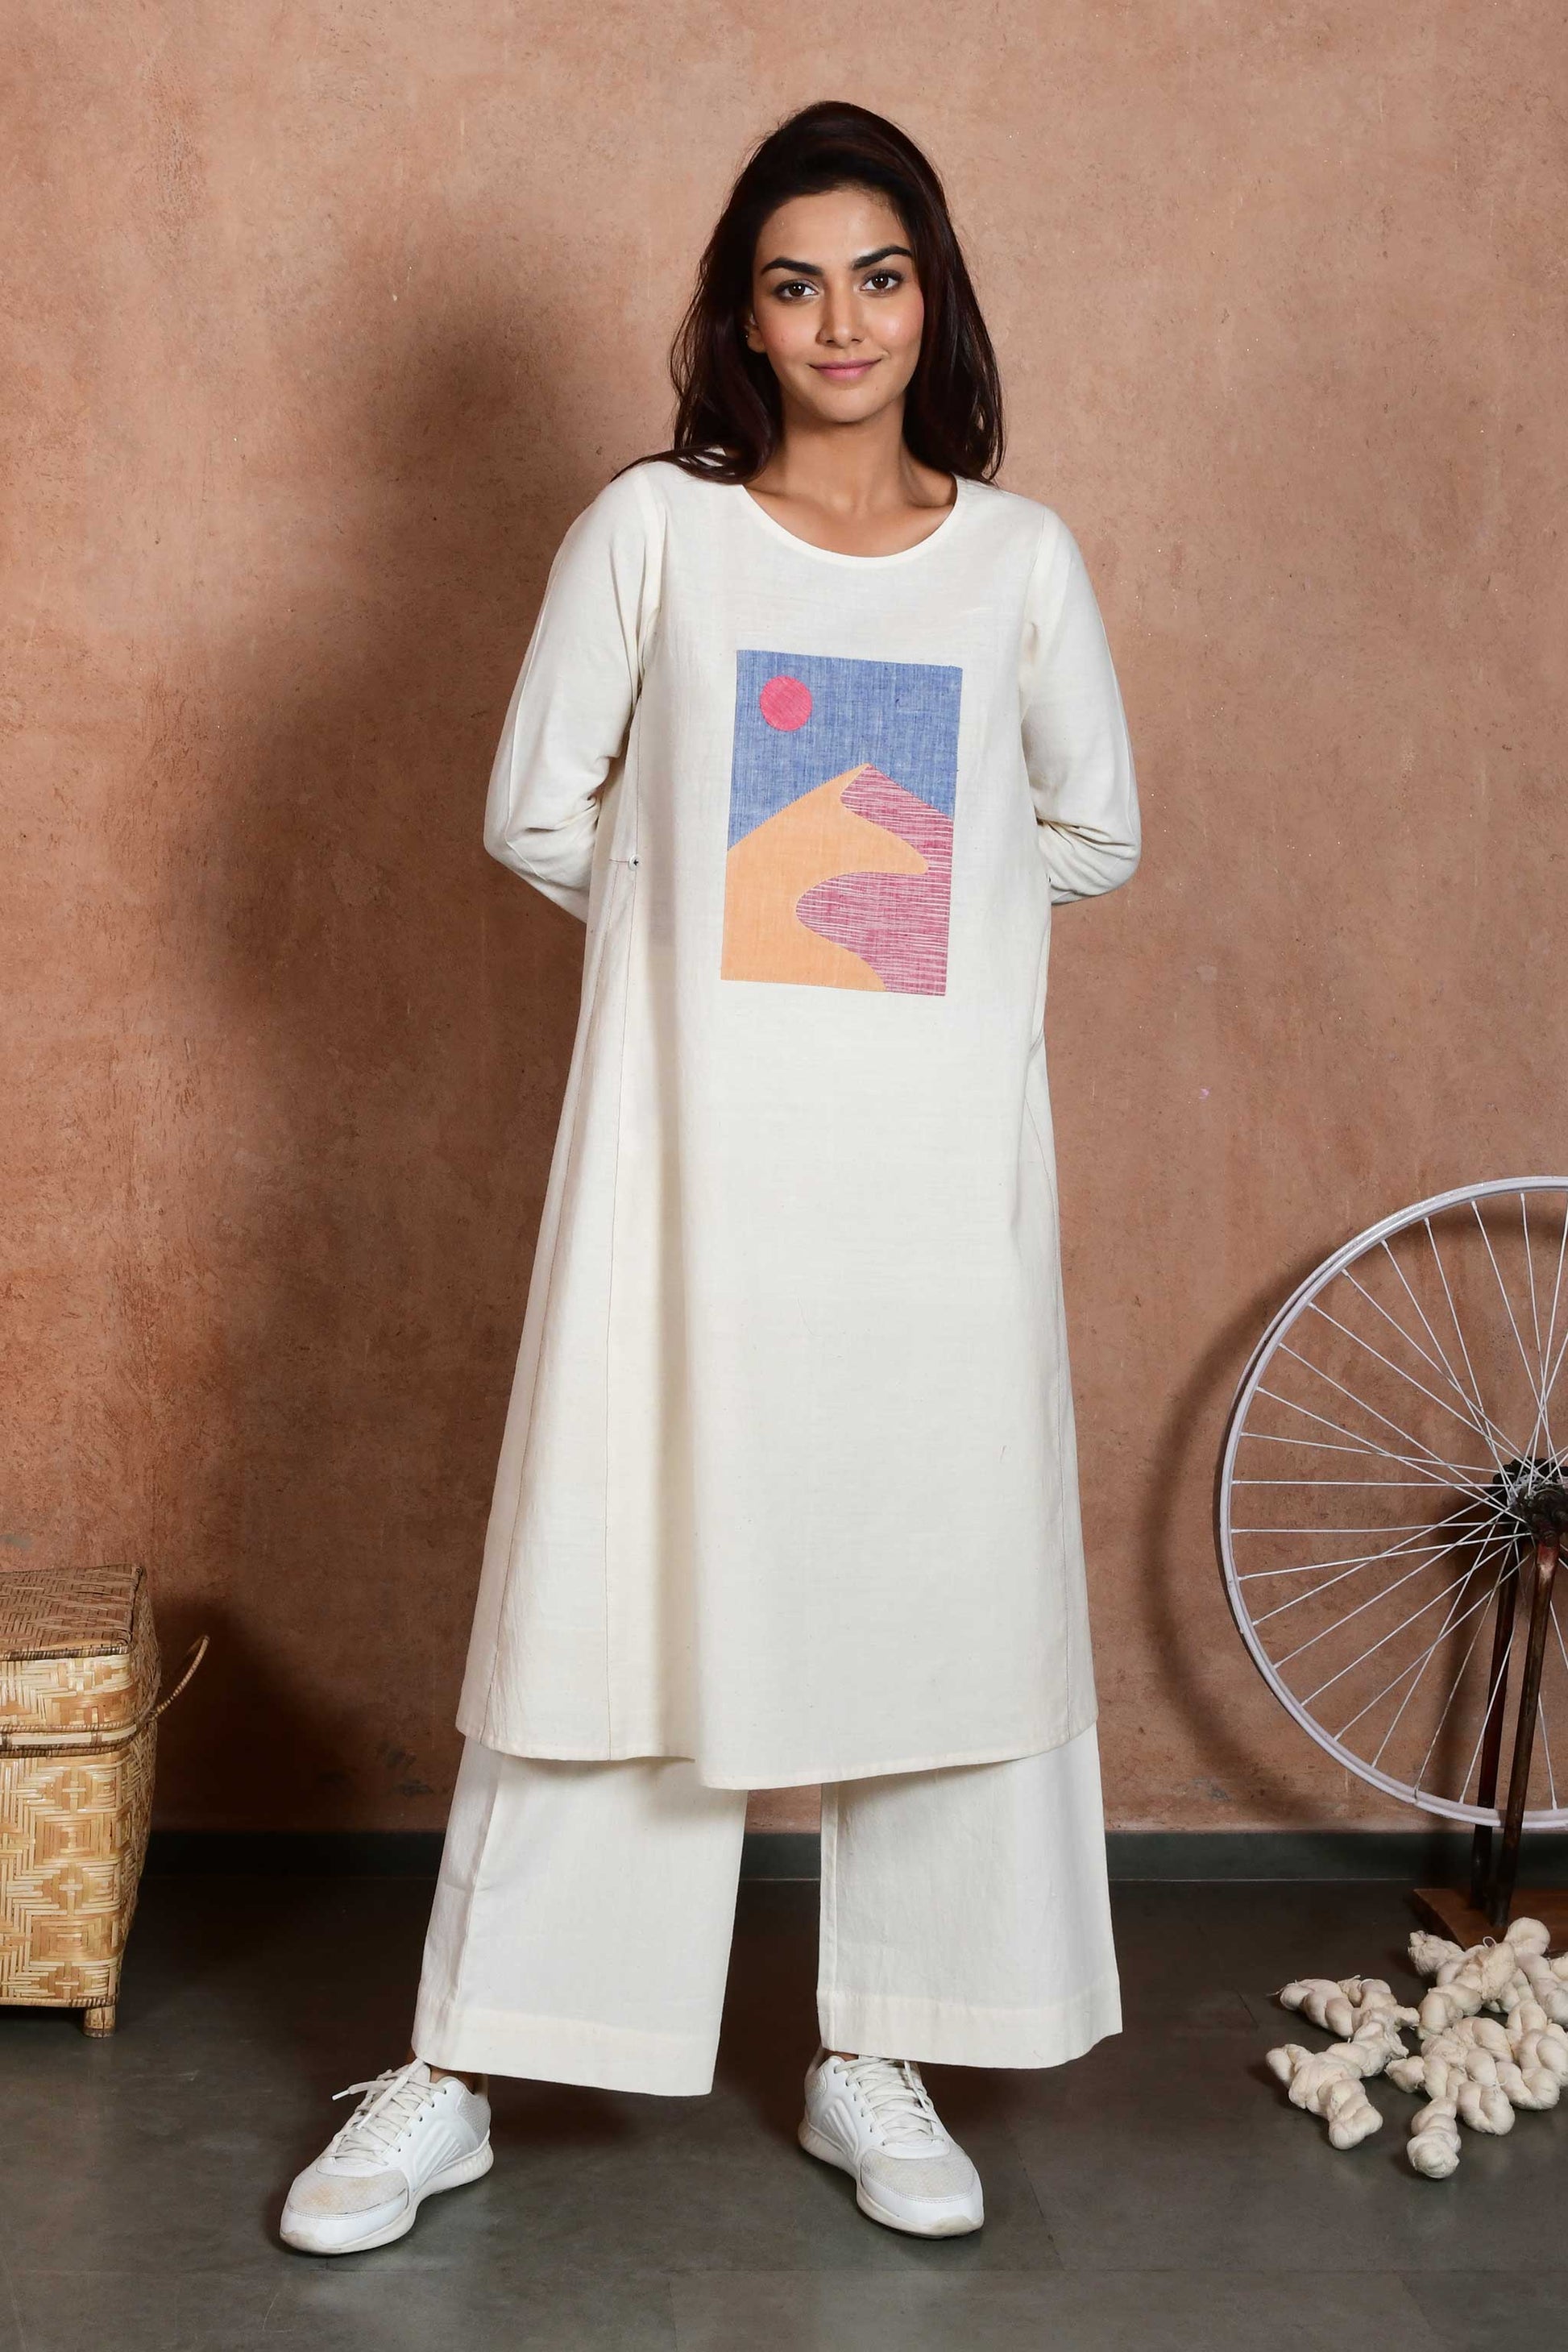 Front pose of a young indian model wearing a knee length off white dress with sleeves and an applique patch depicting a sand dune and sun.